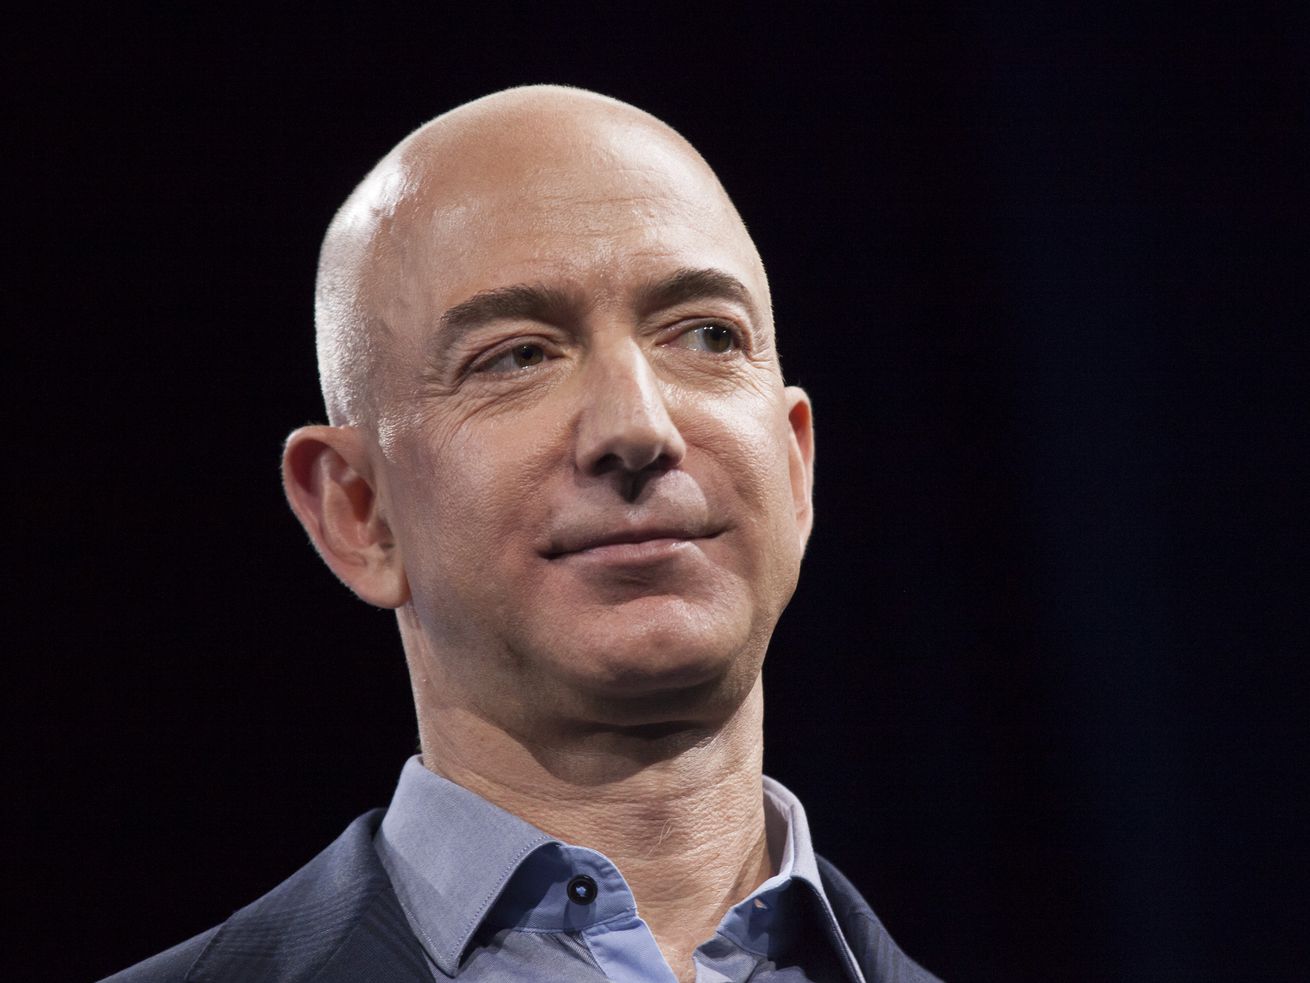 Jeff Bezos is stepping down as Amazon’s CEO